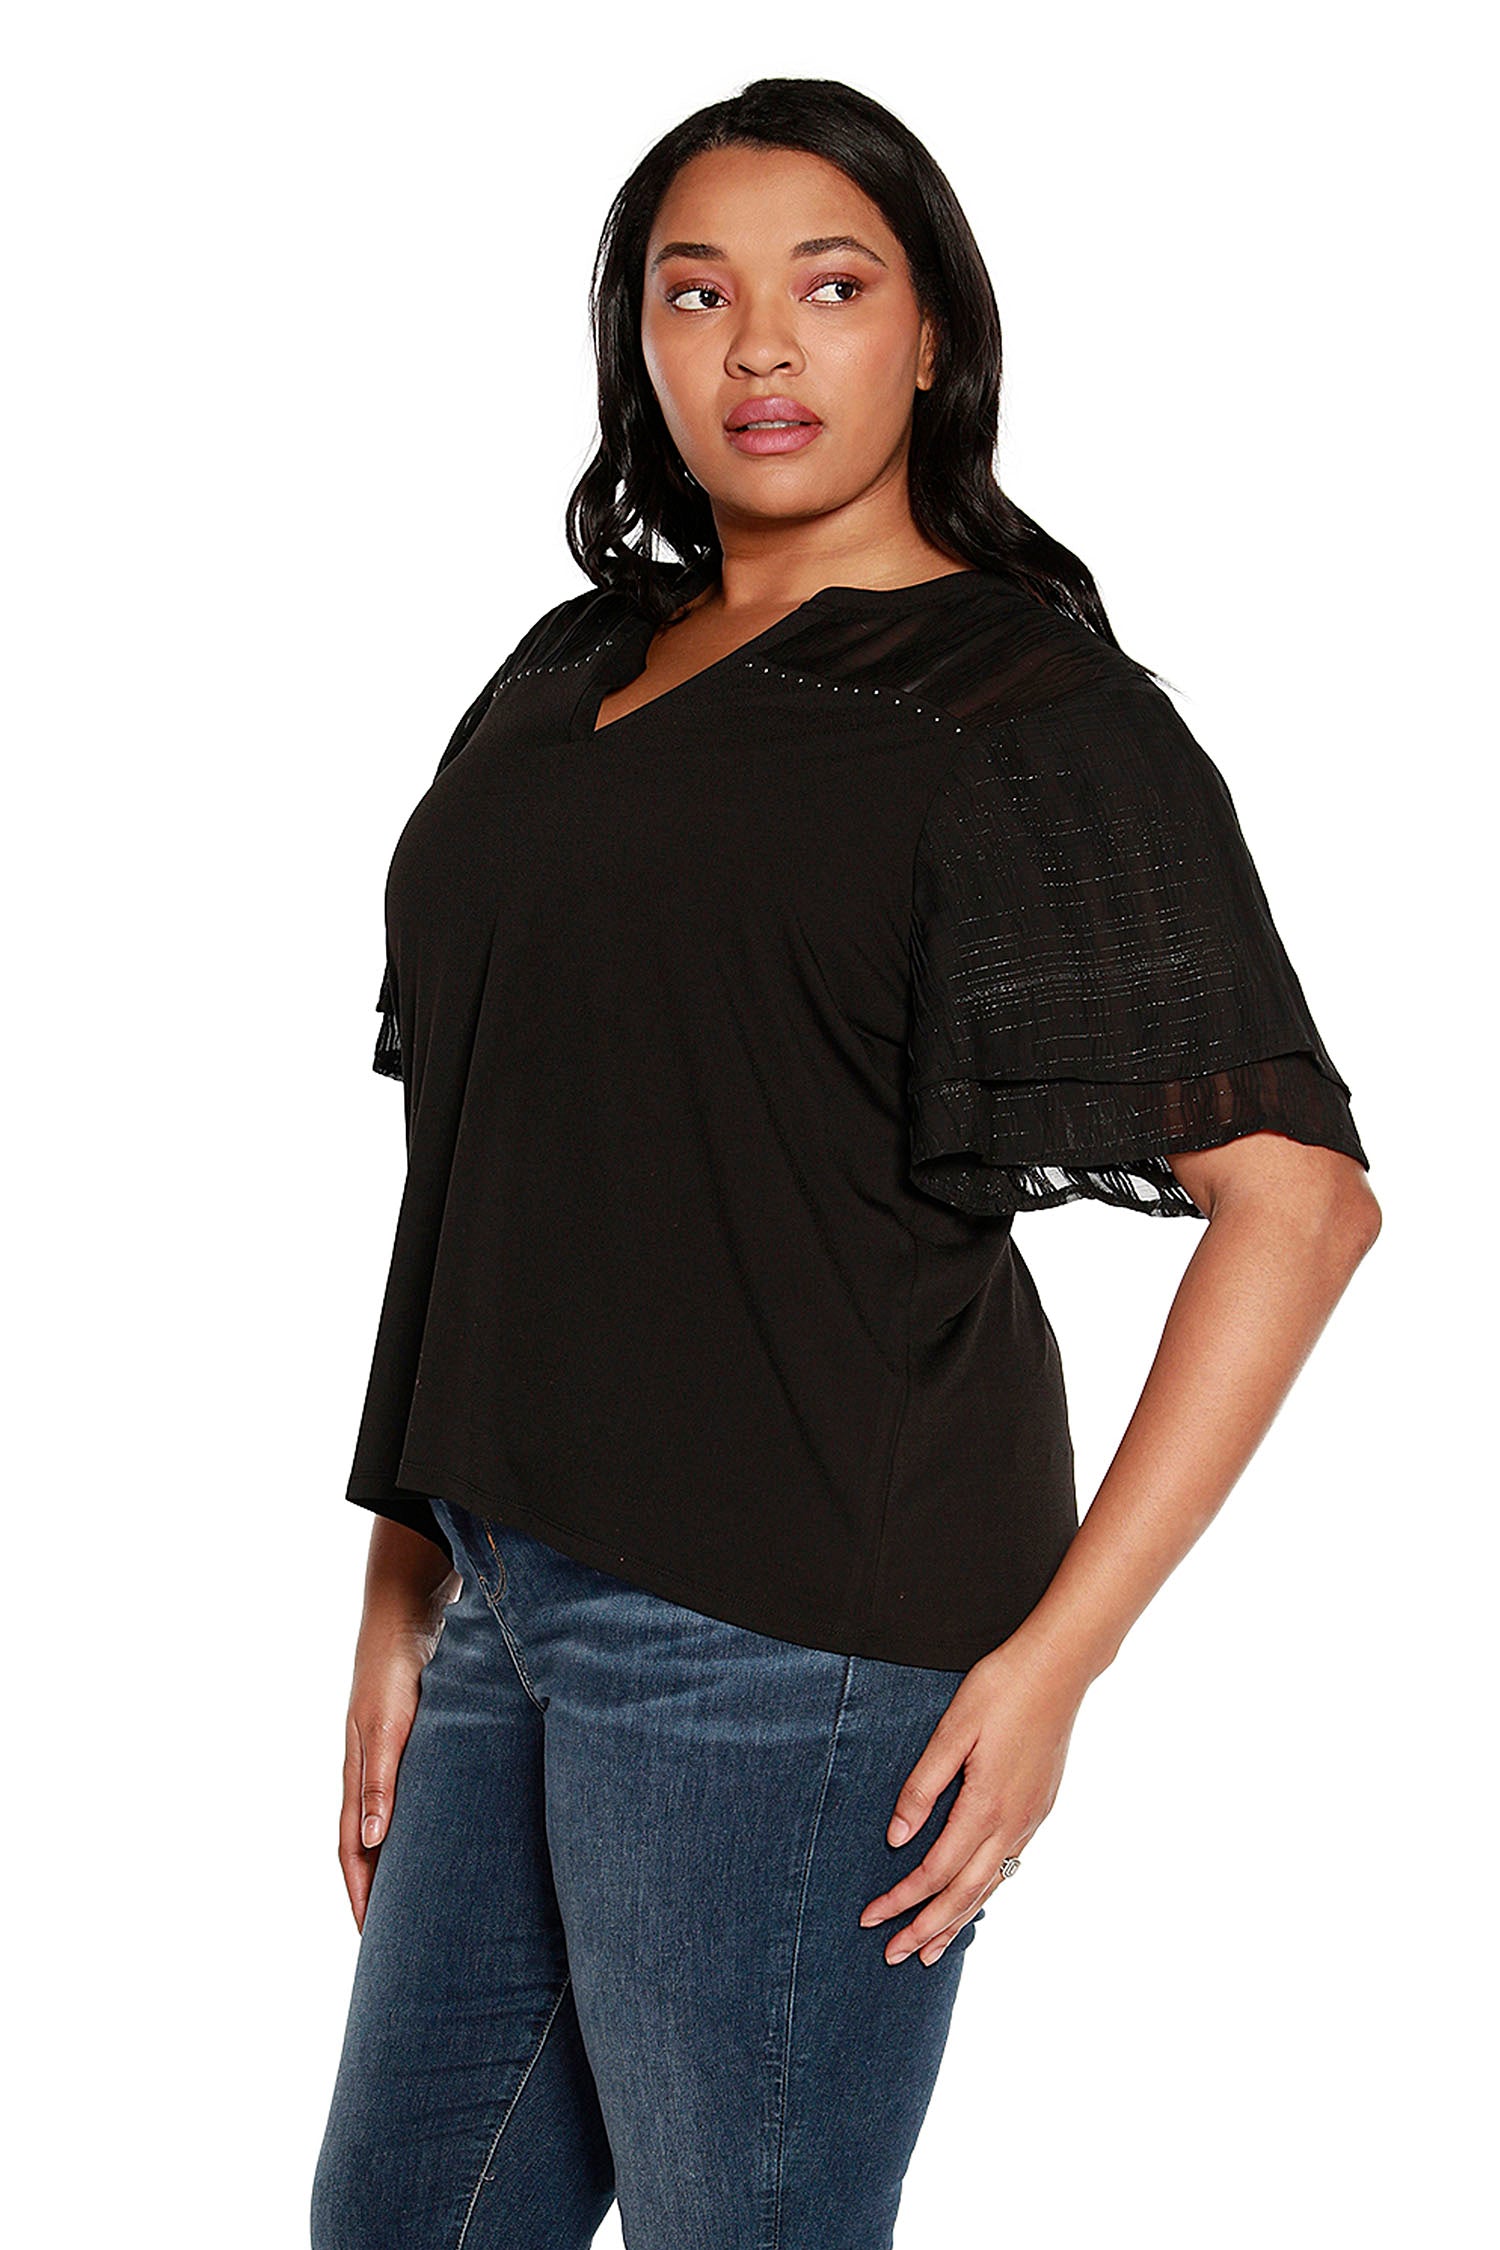 Women's Ruffled Bell Sleeve Top with Sheer Yoke and Sleeves and Nailhead Trim | Curvy